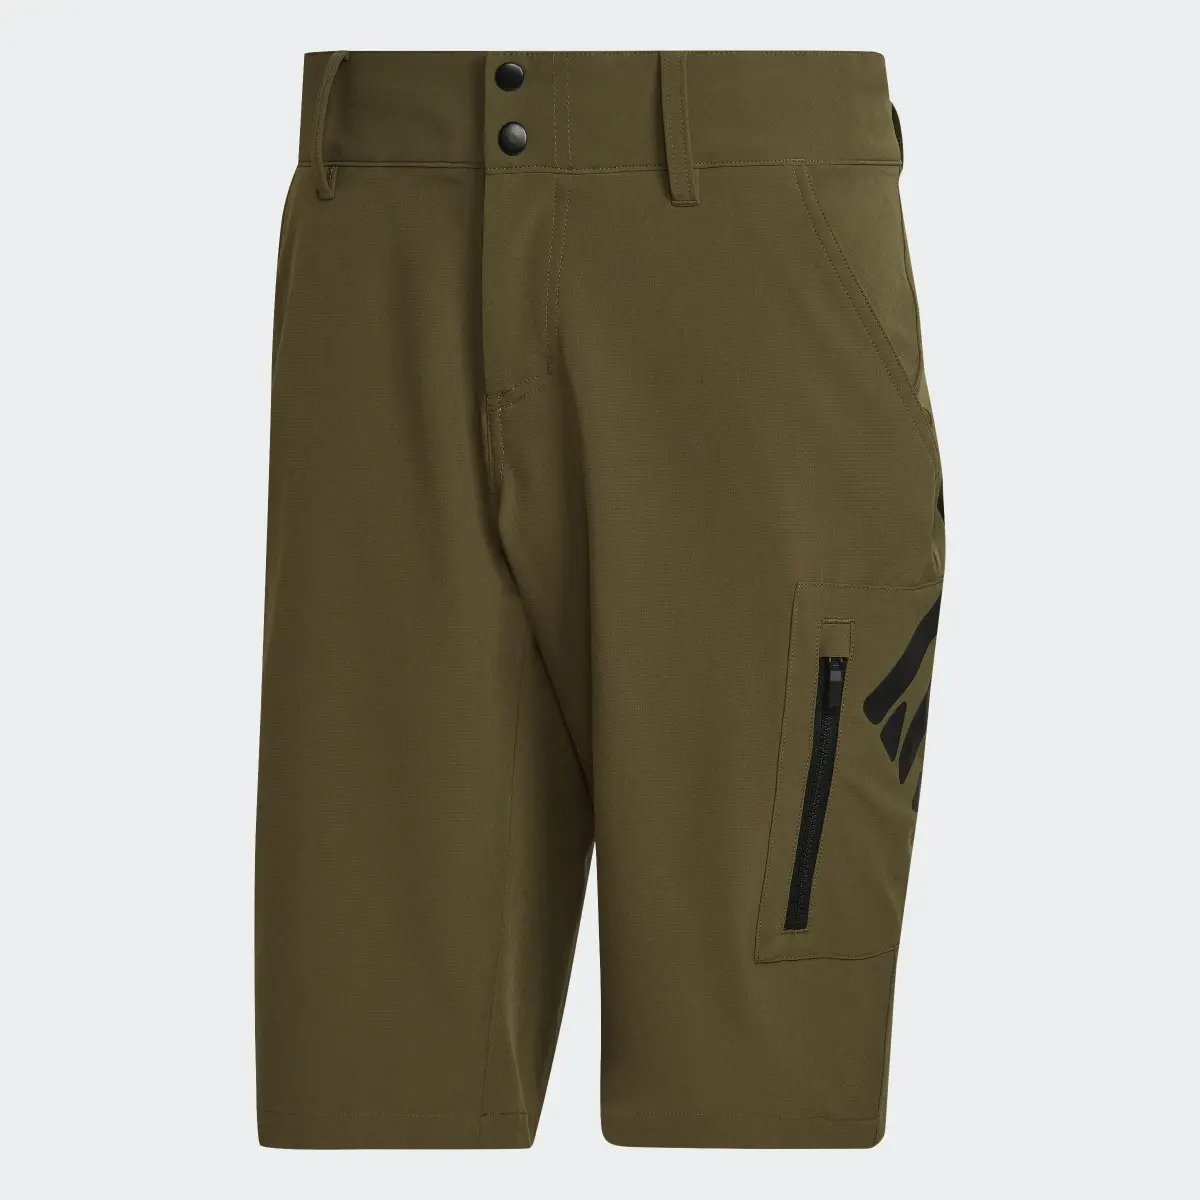 Adidas Five Ten Brand of the Brave Shorts. 1